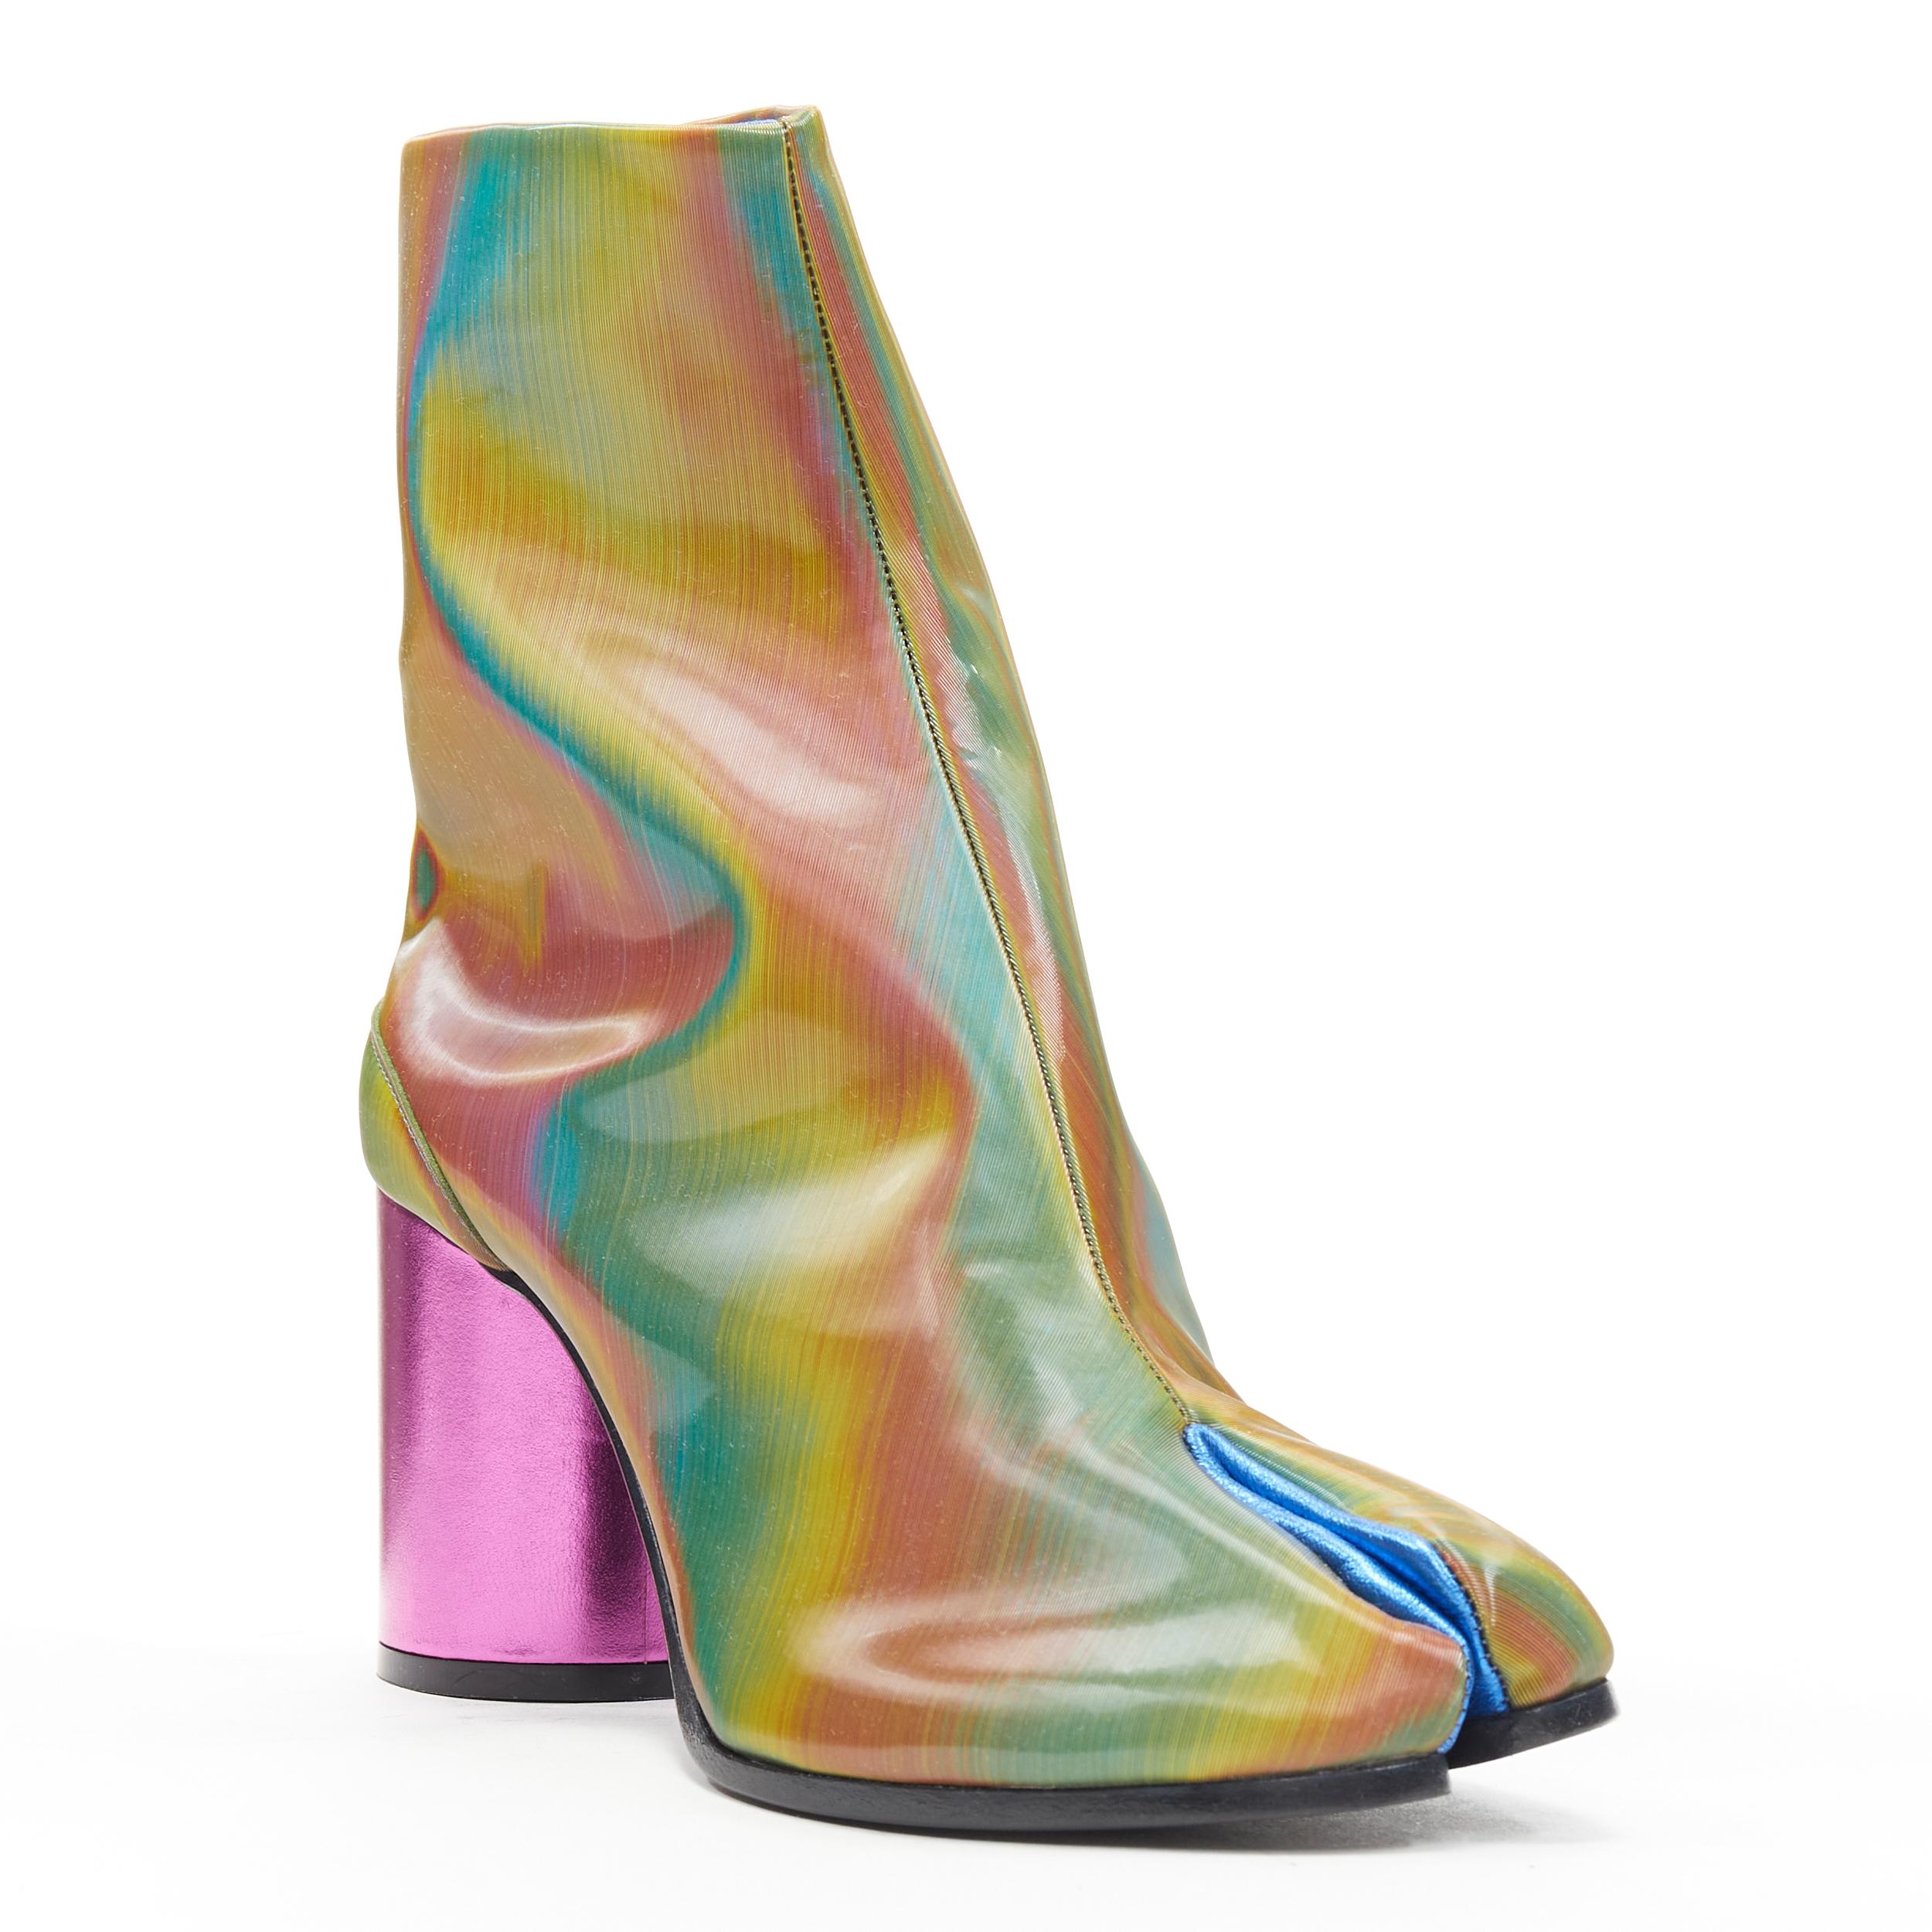 new MAISON MARGIELA 2019 Tabi holographic pink heel split toe camel boot EU39 
Reference: TGAS/B01179 
Brand: Maison Margiela 
Designer: Maison Margiela 
Material: Fabric 
Color: Multicolour 
Pattern: Solid 
Closure: Hook & Loop 
Extra Detail: